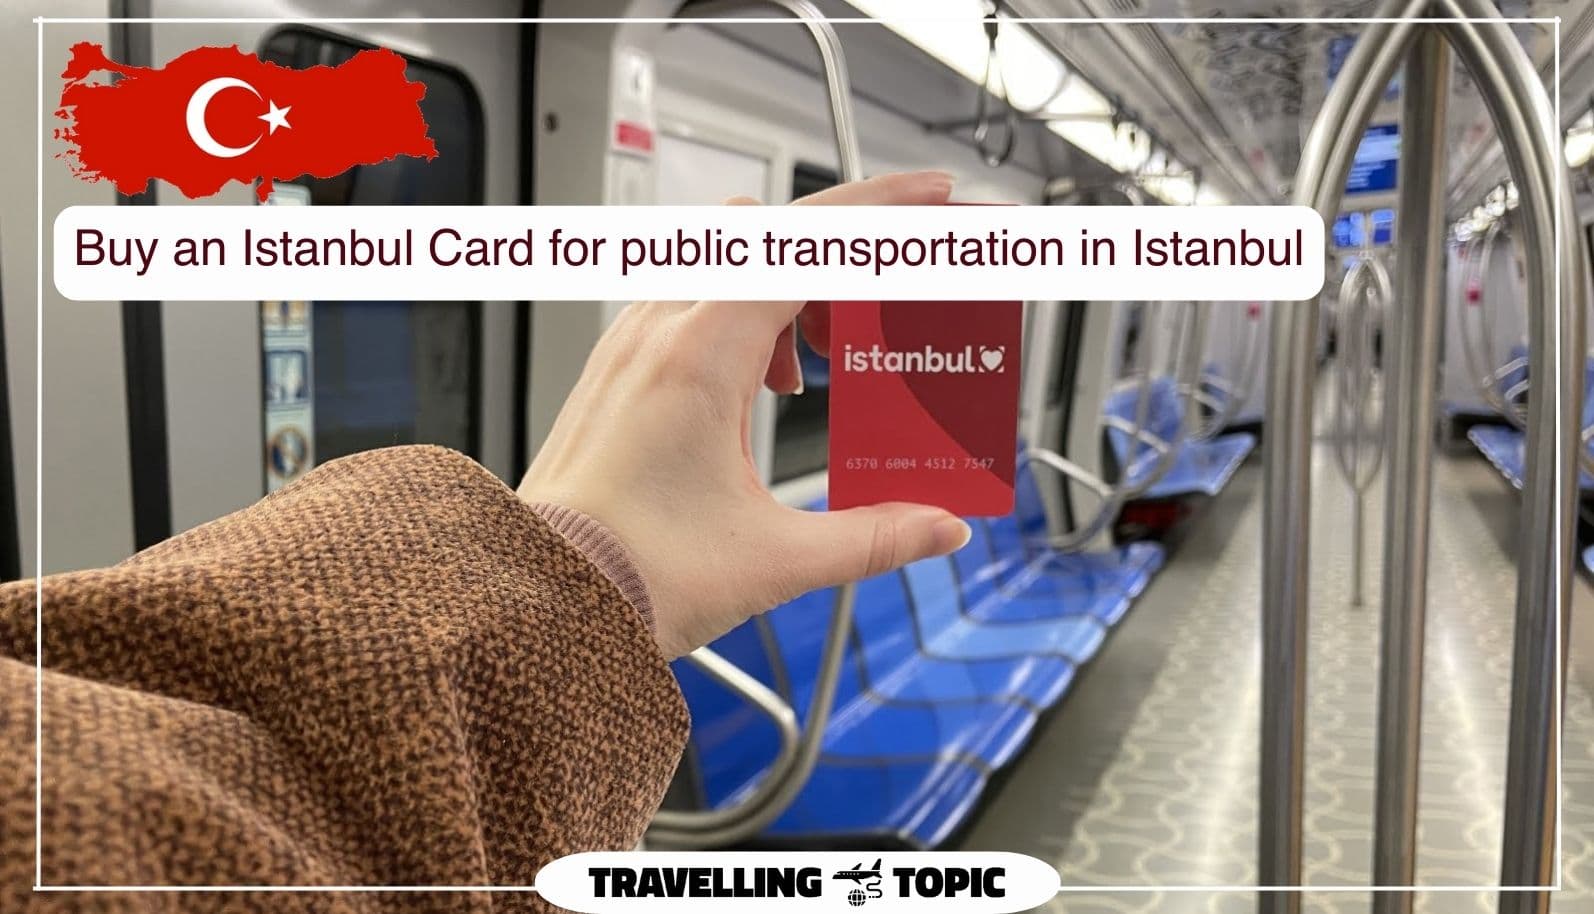 Buy an Istanbul Card for public transportation in Istanbul